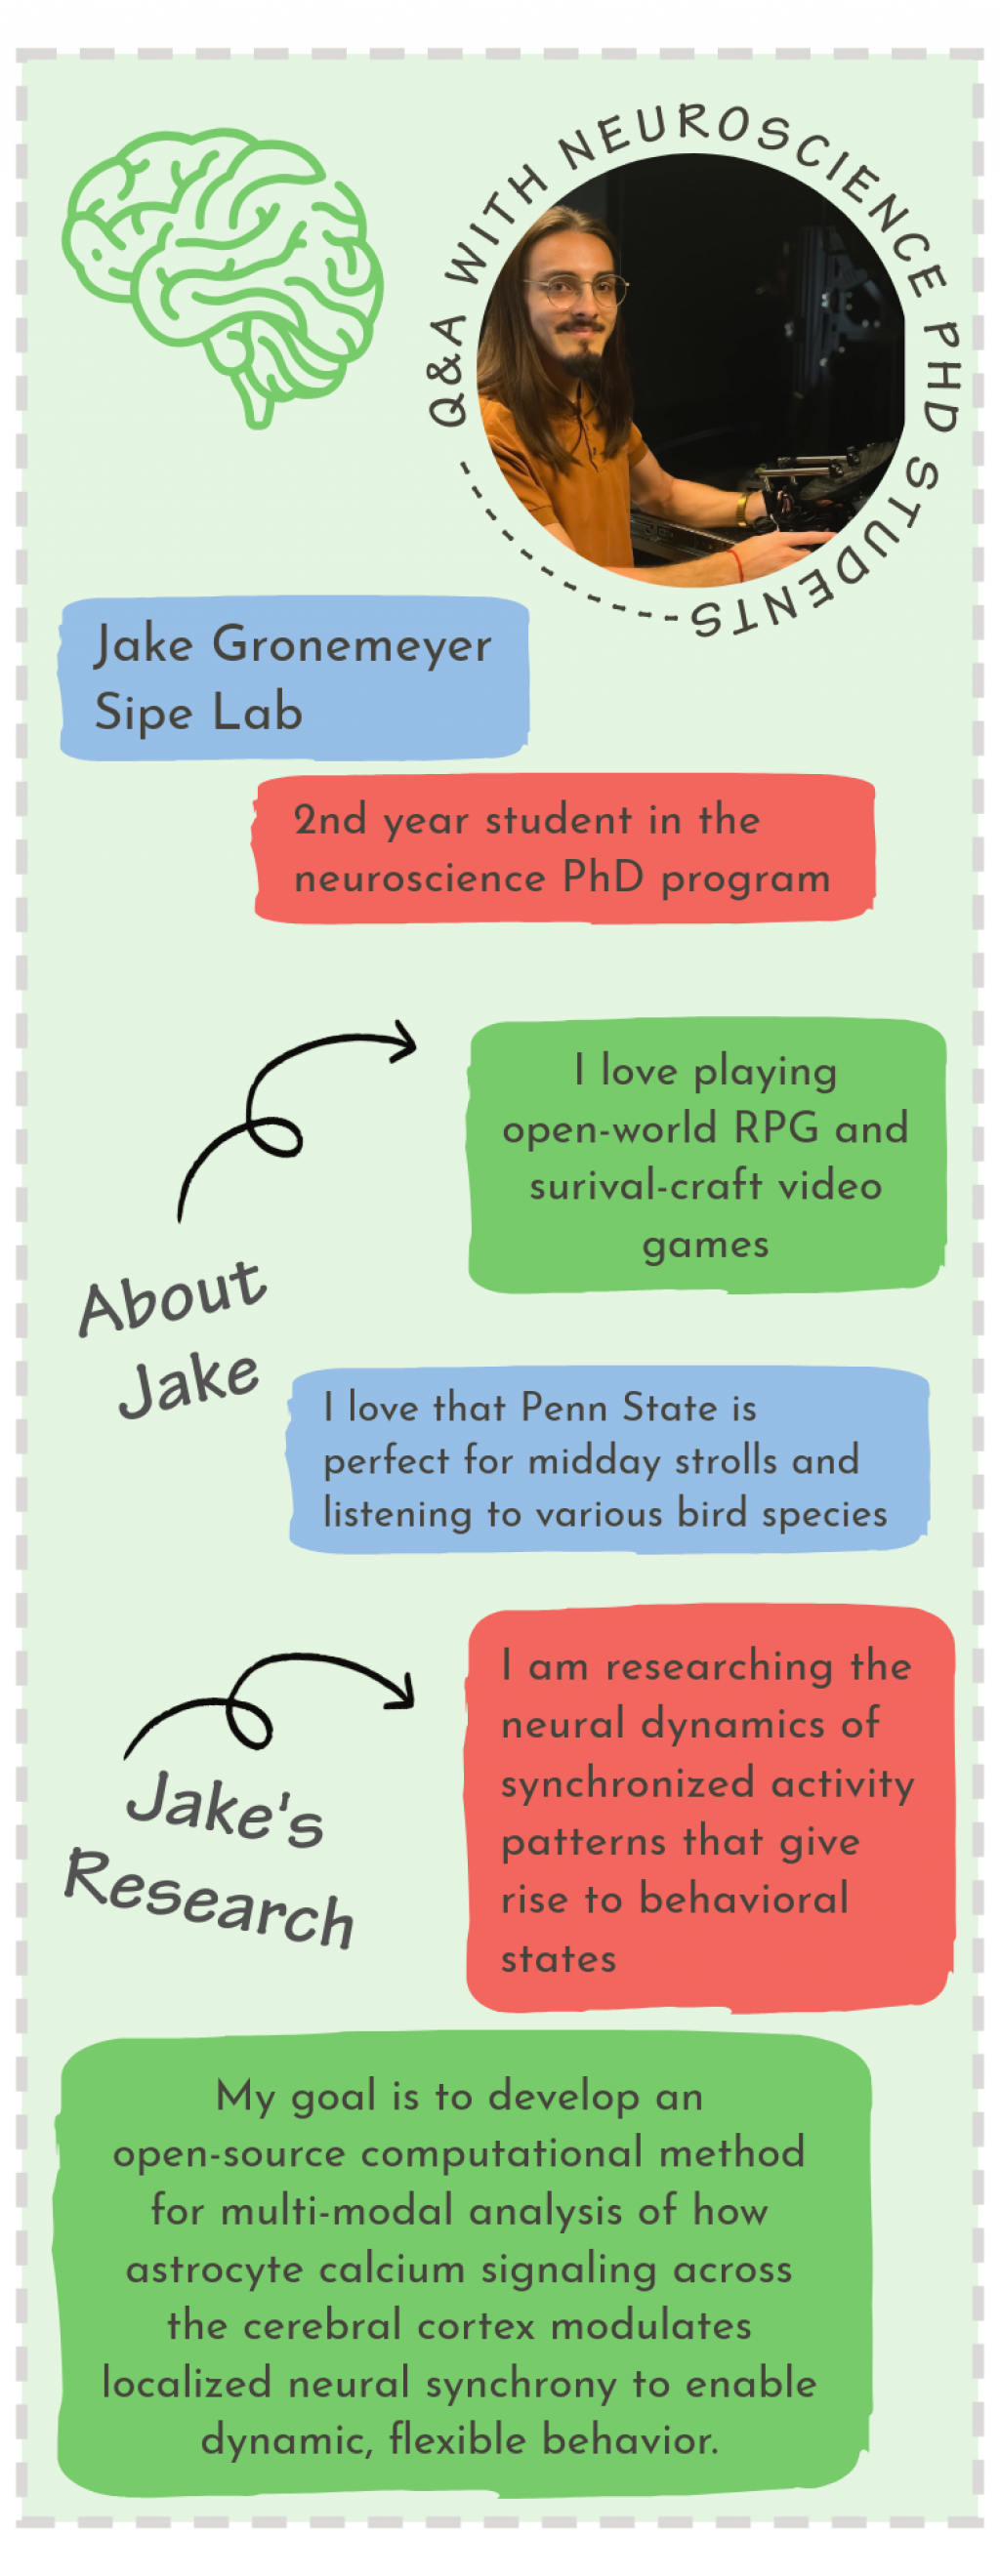 A Q&A with Jake, a neuroscience PhD student in Grayson Sipe's lab